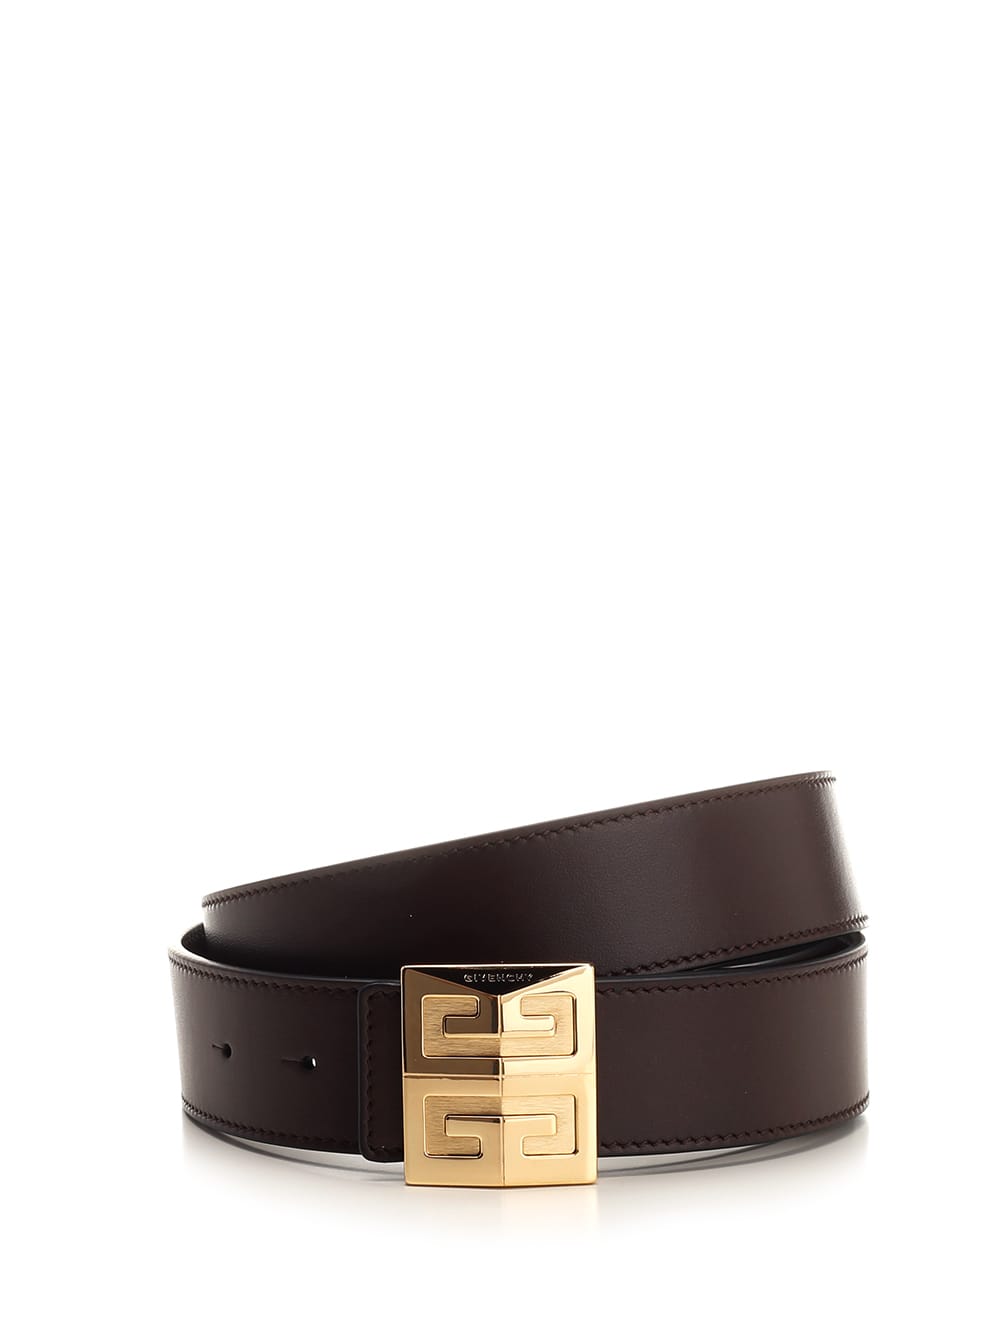 Givenchy 4g Reversible Belt In Brown